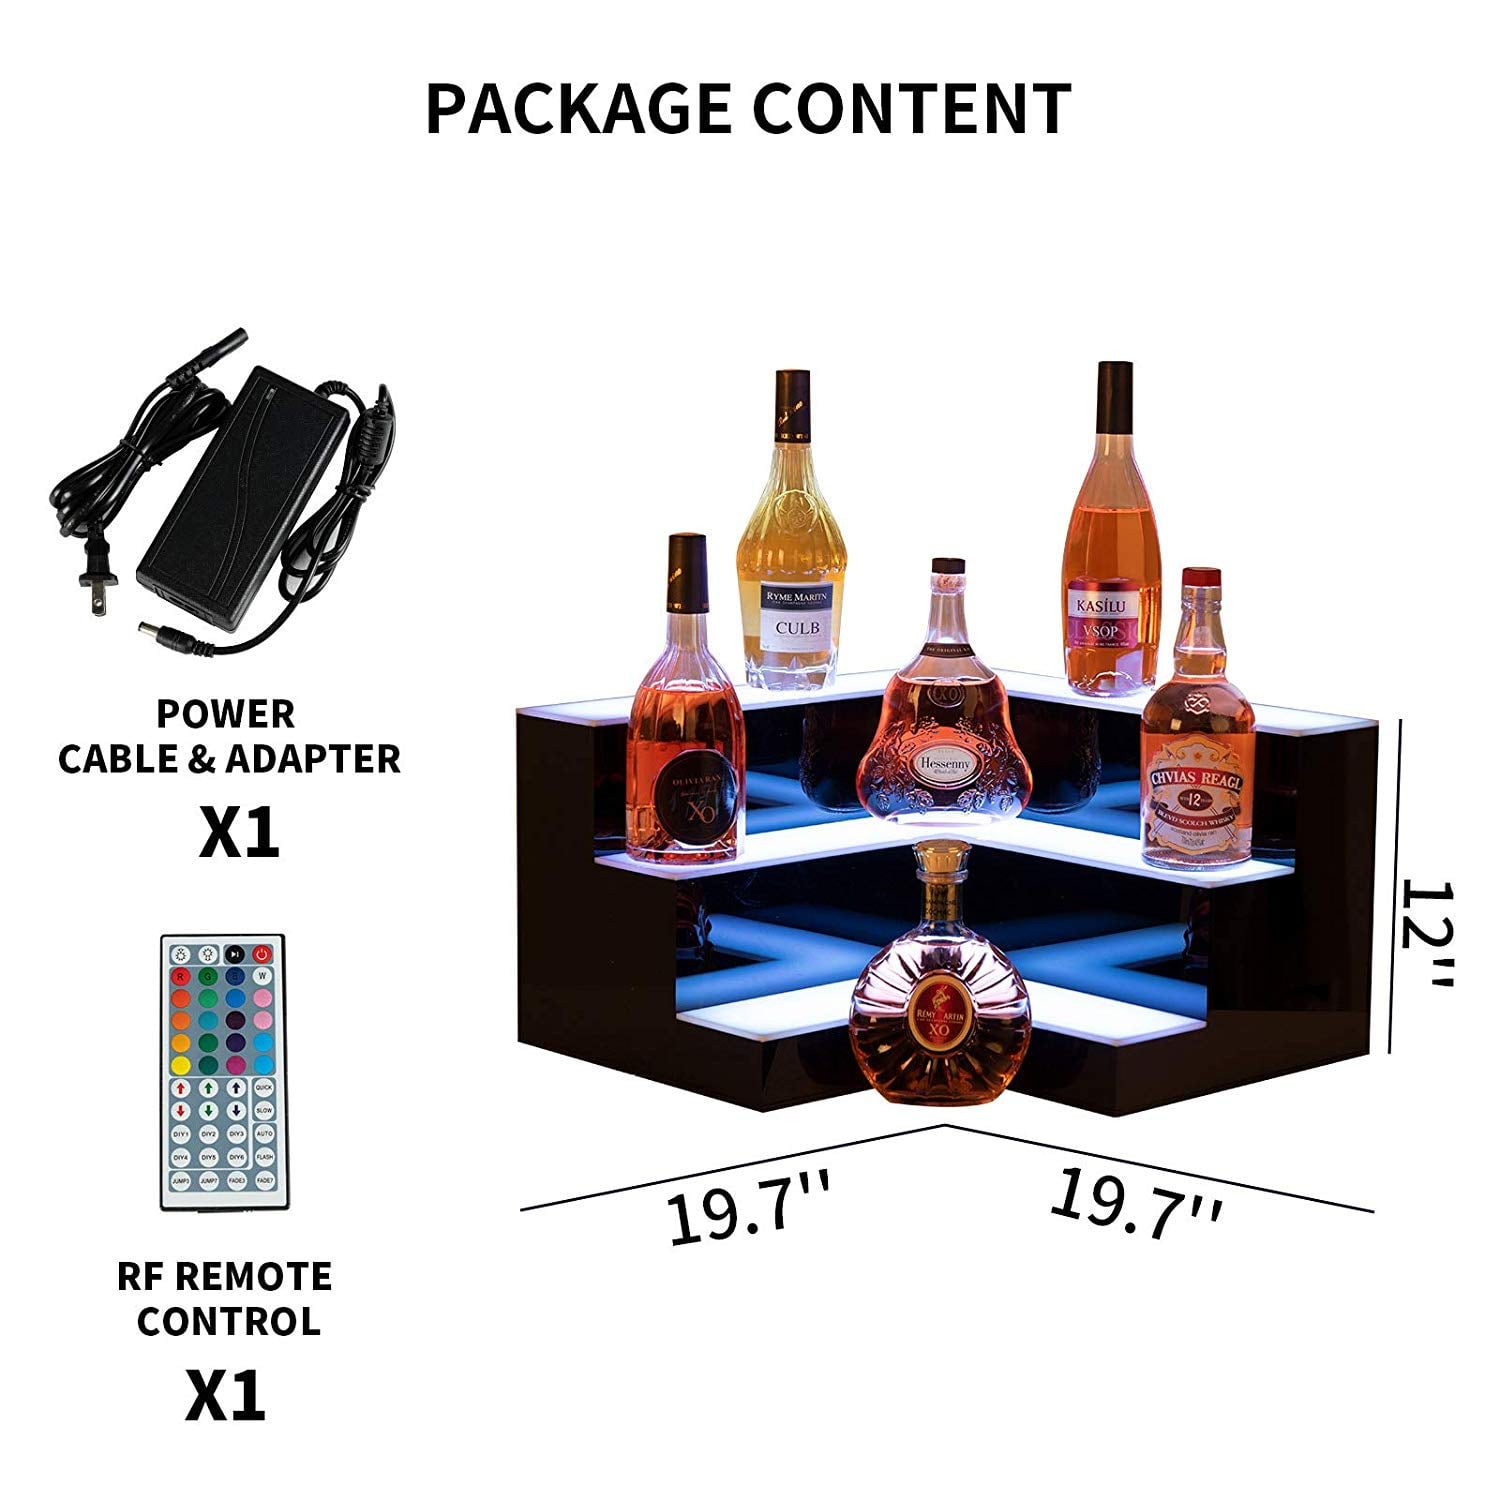 Nurxiovo LED Liquor Bottle Display 31 Inch LED Display Shelf Lighted 2 Step Island Illuminated Bottle Shelf with DIY Mode,Remote Control,Color Changing for Party Home Bar L31.5xW17.3xH7.87 